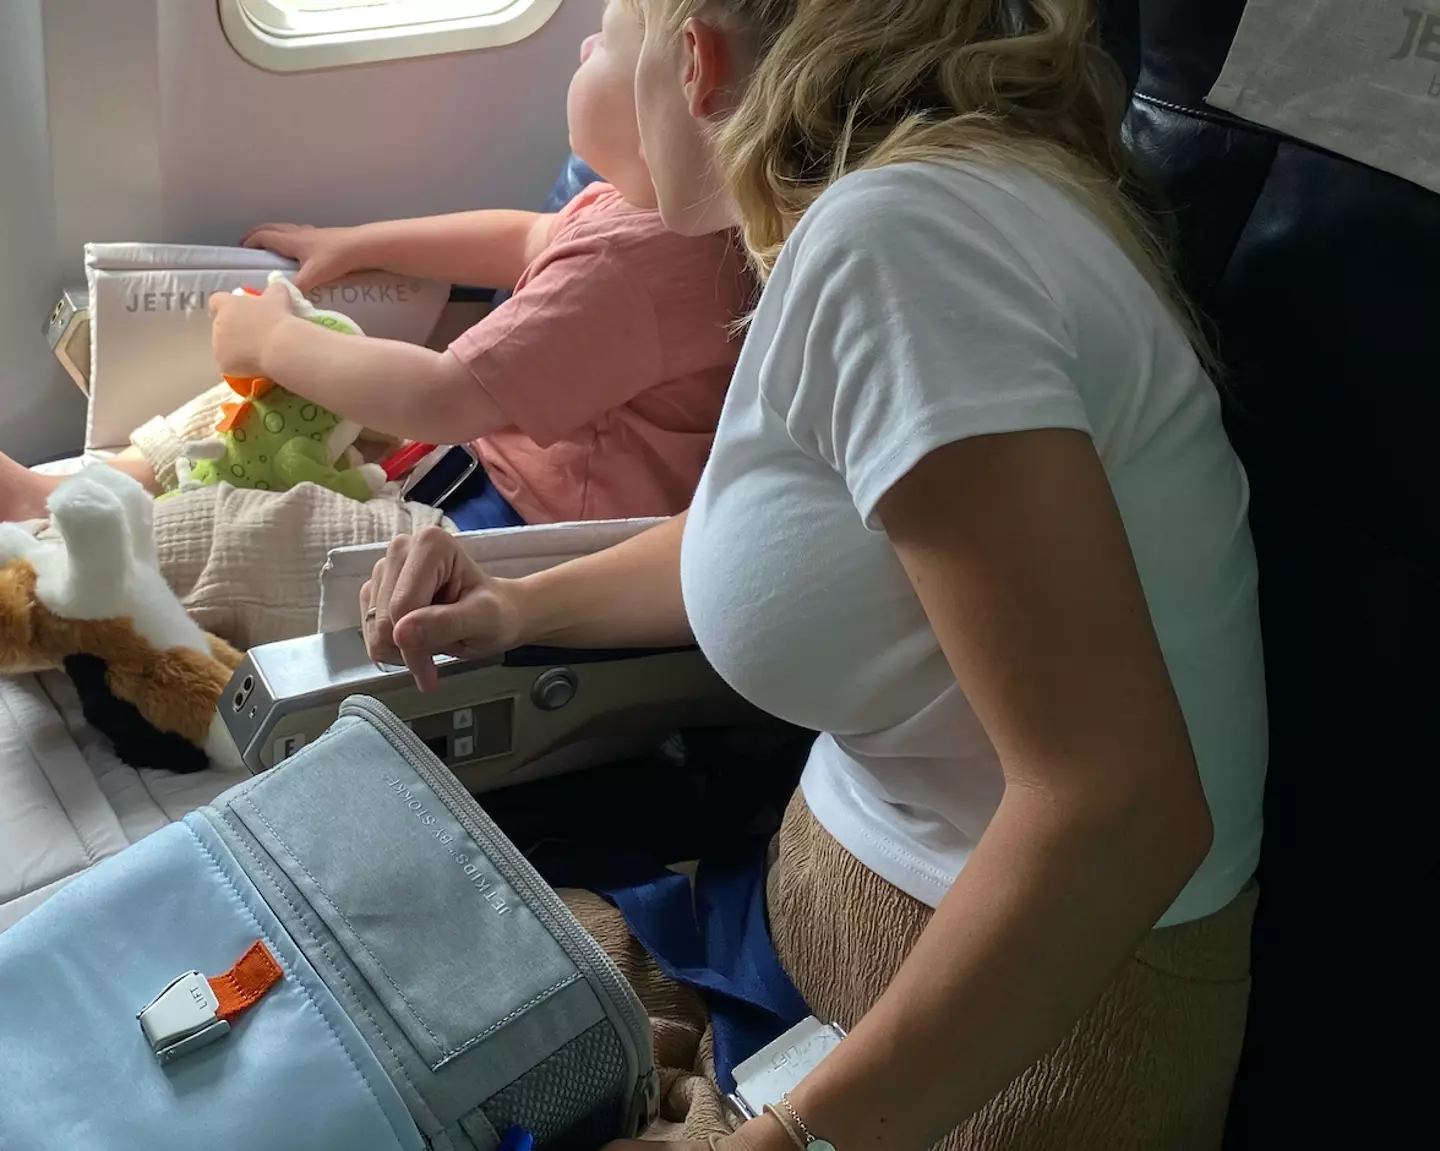 The mum was left to deal with three kids on the plane.